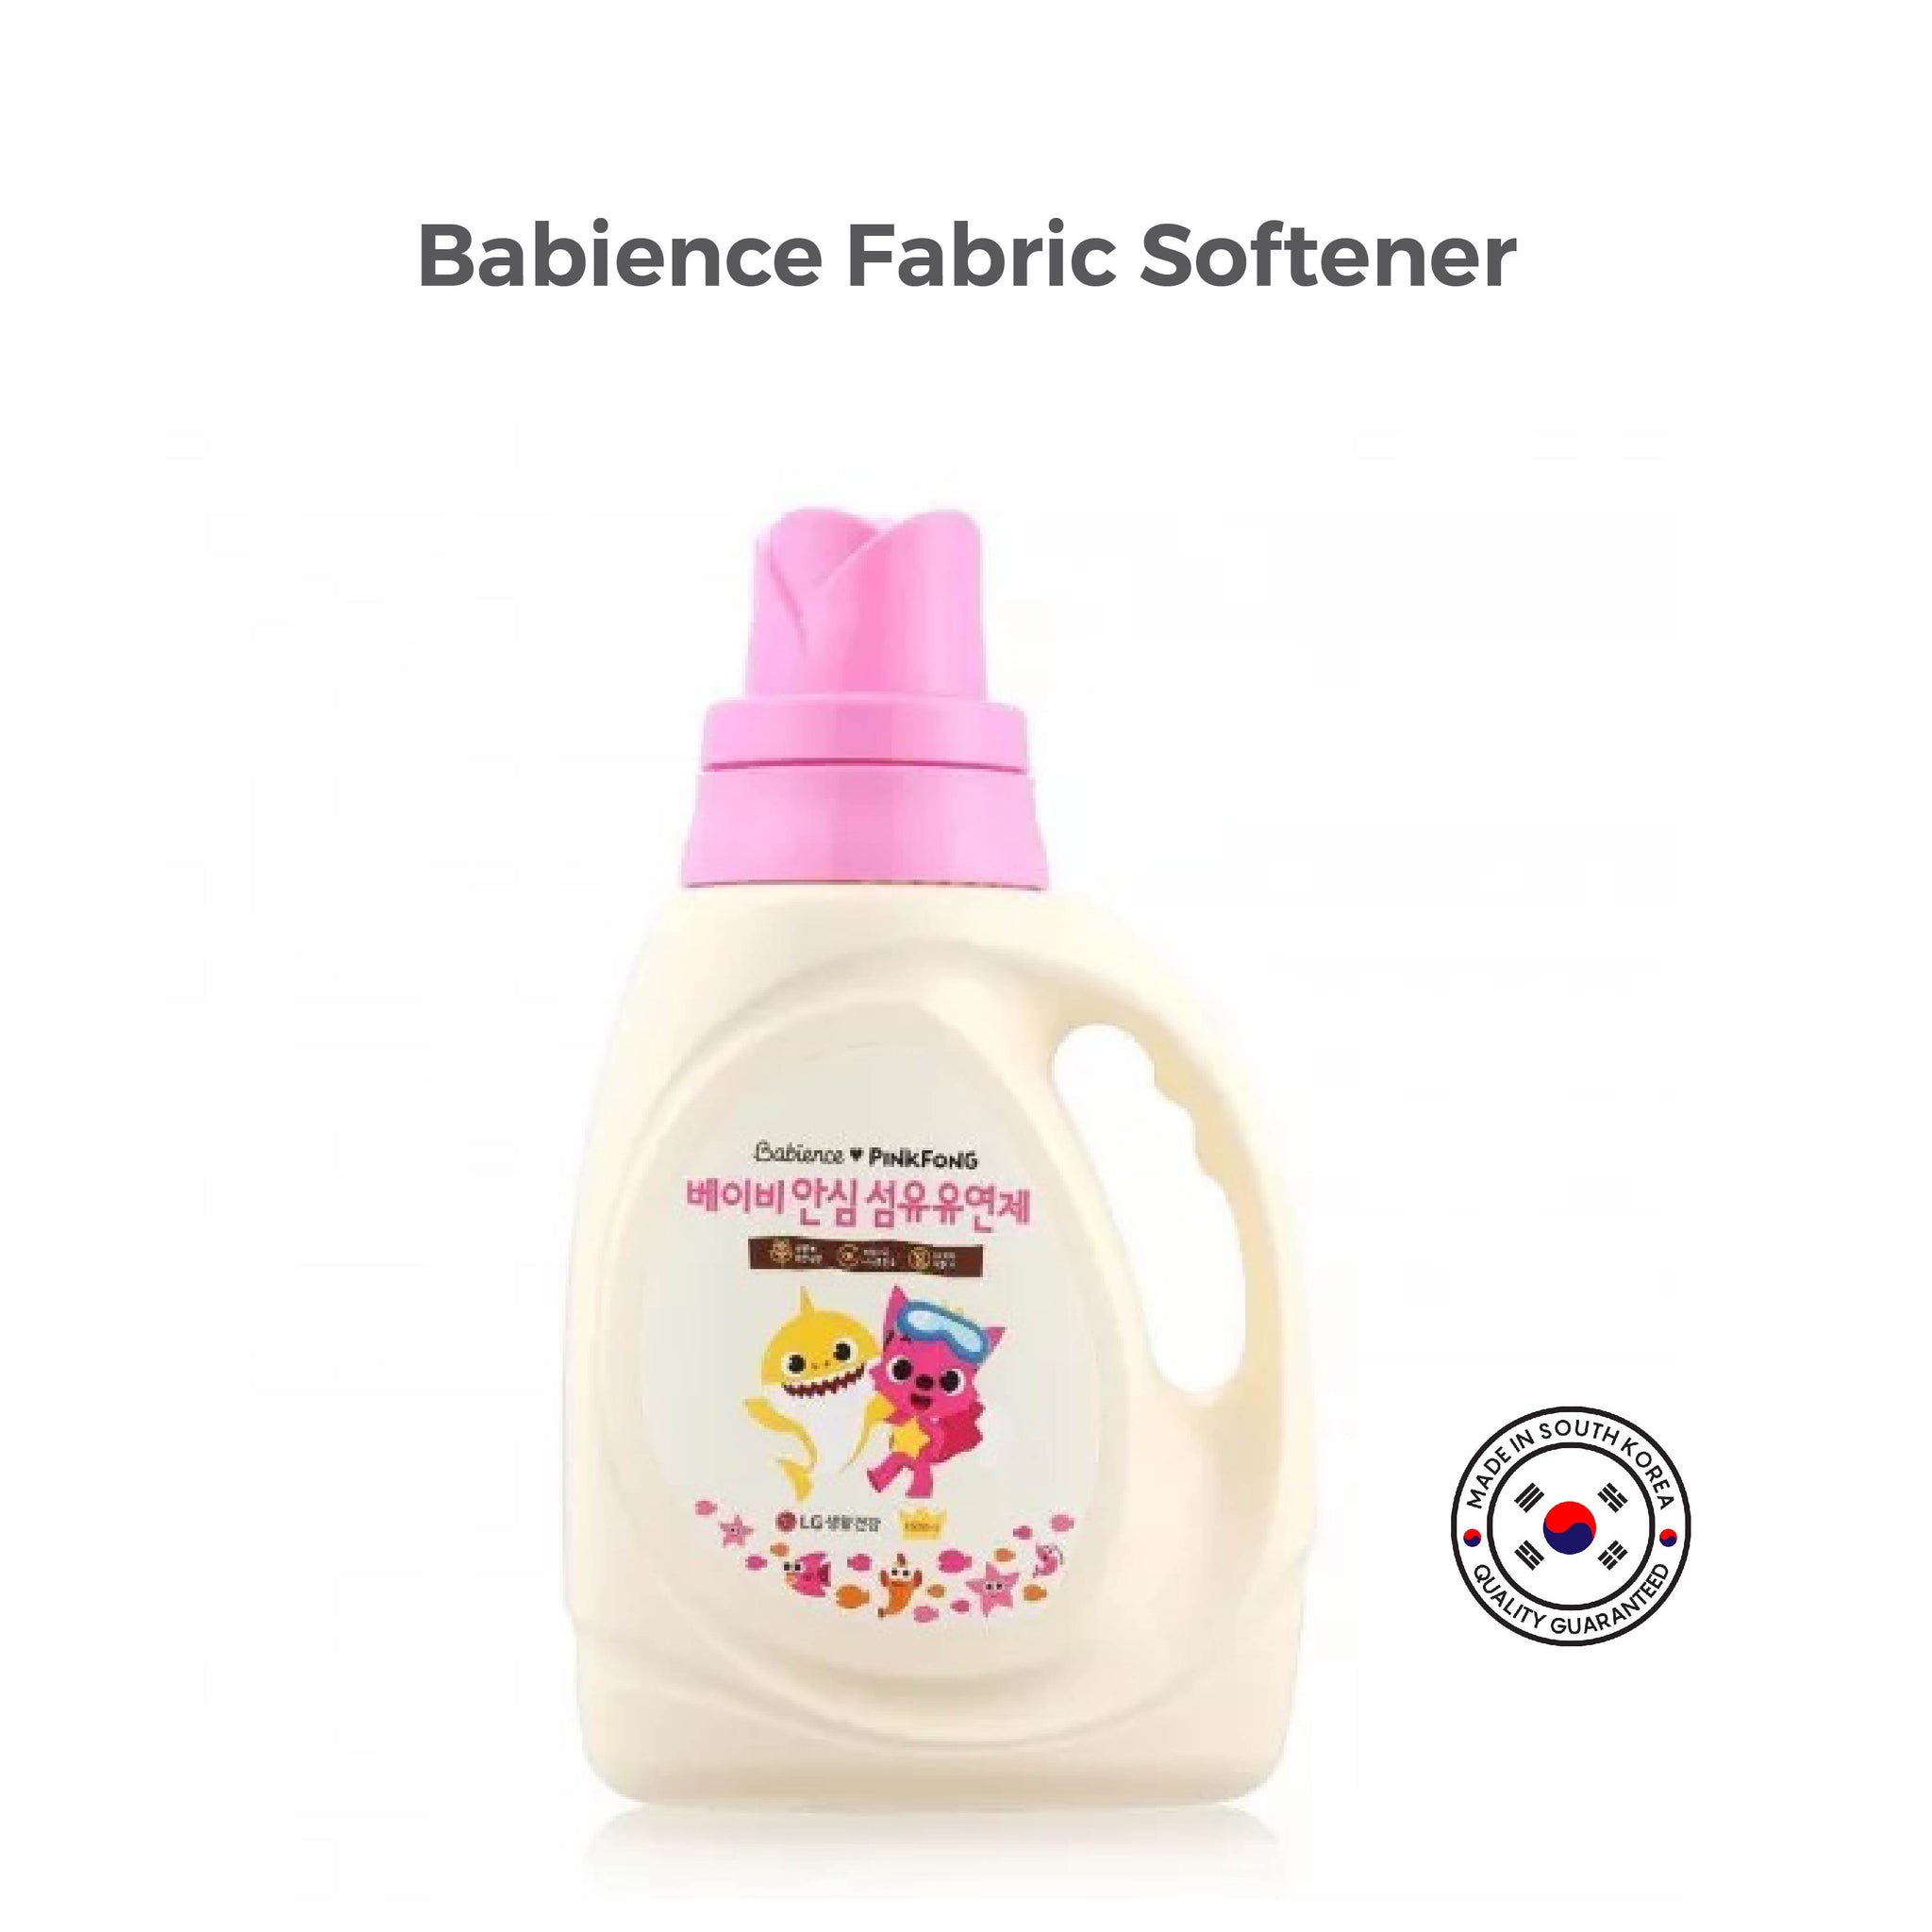 Buy Fabric Softener For Baby in Singapore - Pinkfong x Babience Fabric Softener